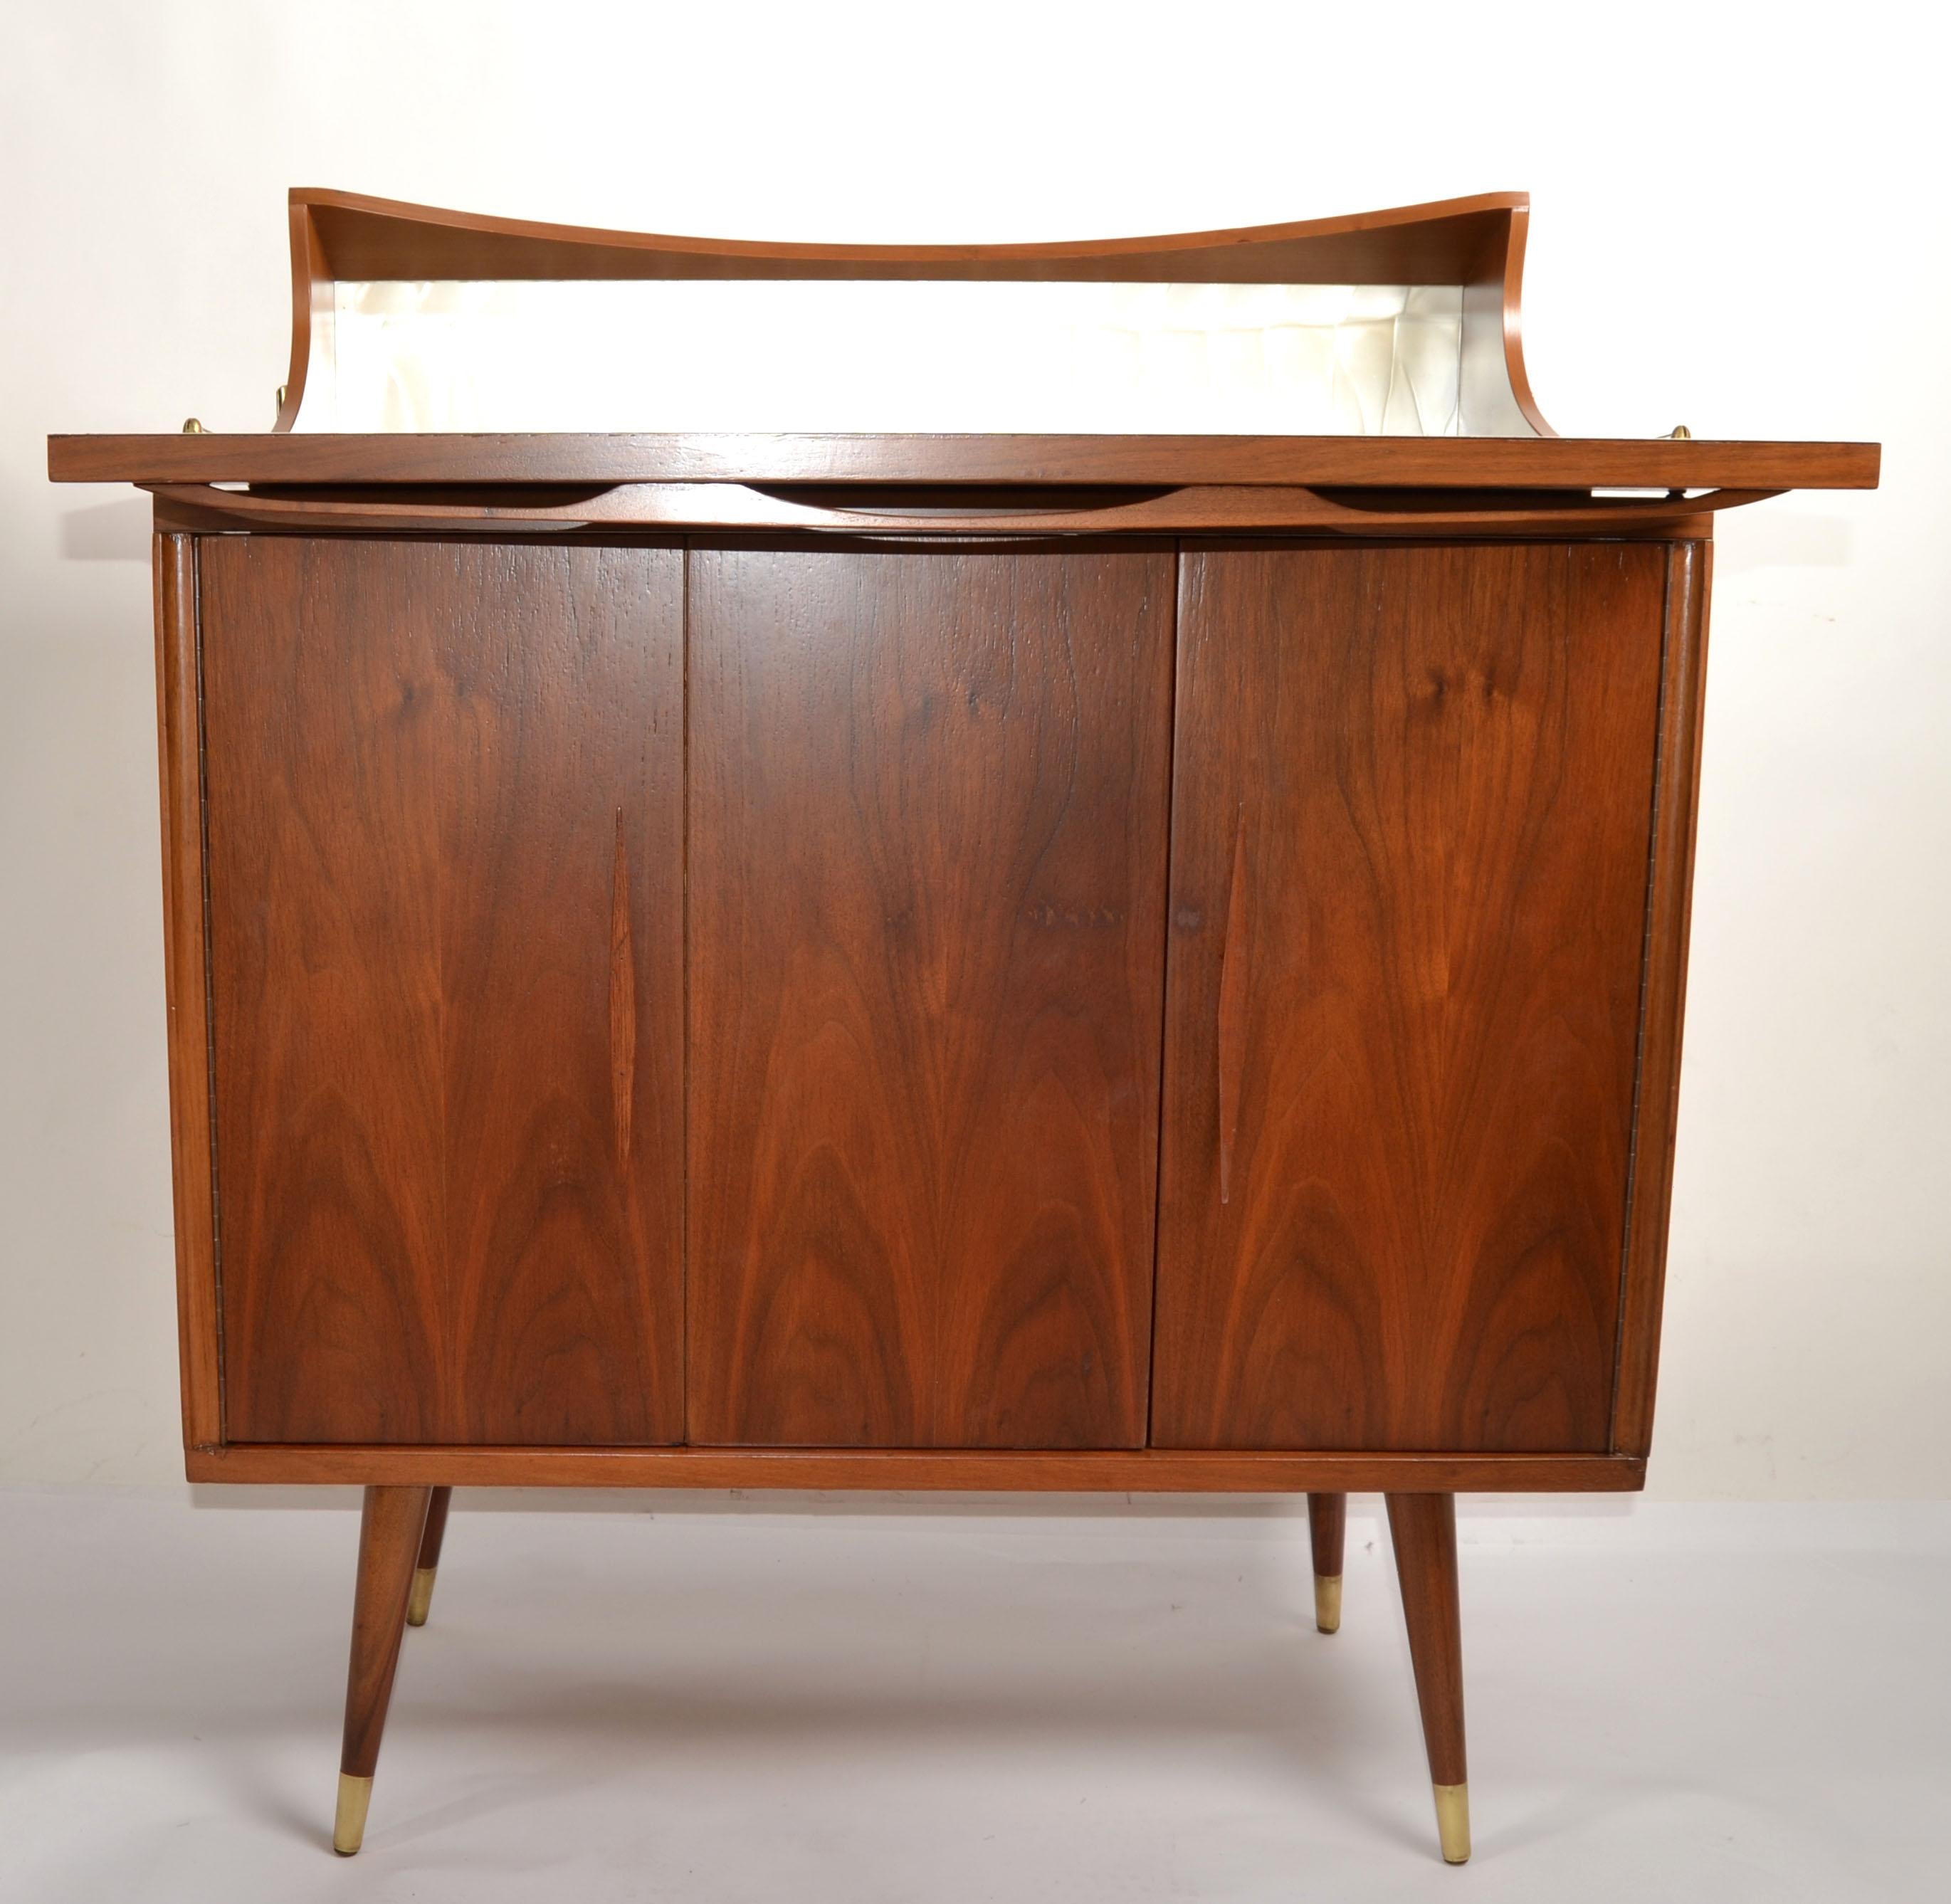 Charming Mid-Century Modern American Versatile Walnut Dry Bar, Server or Drinks Cabinet with pull up, flip up Formica top as a mixing Platform with Bottle and Glass shaped cutouts.
The center reveals enough storage compartment, behind 2 swing doors.